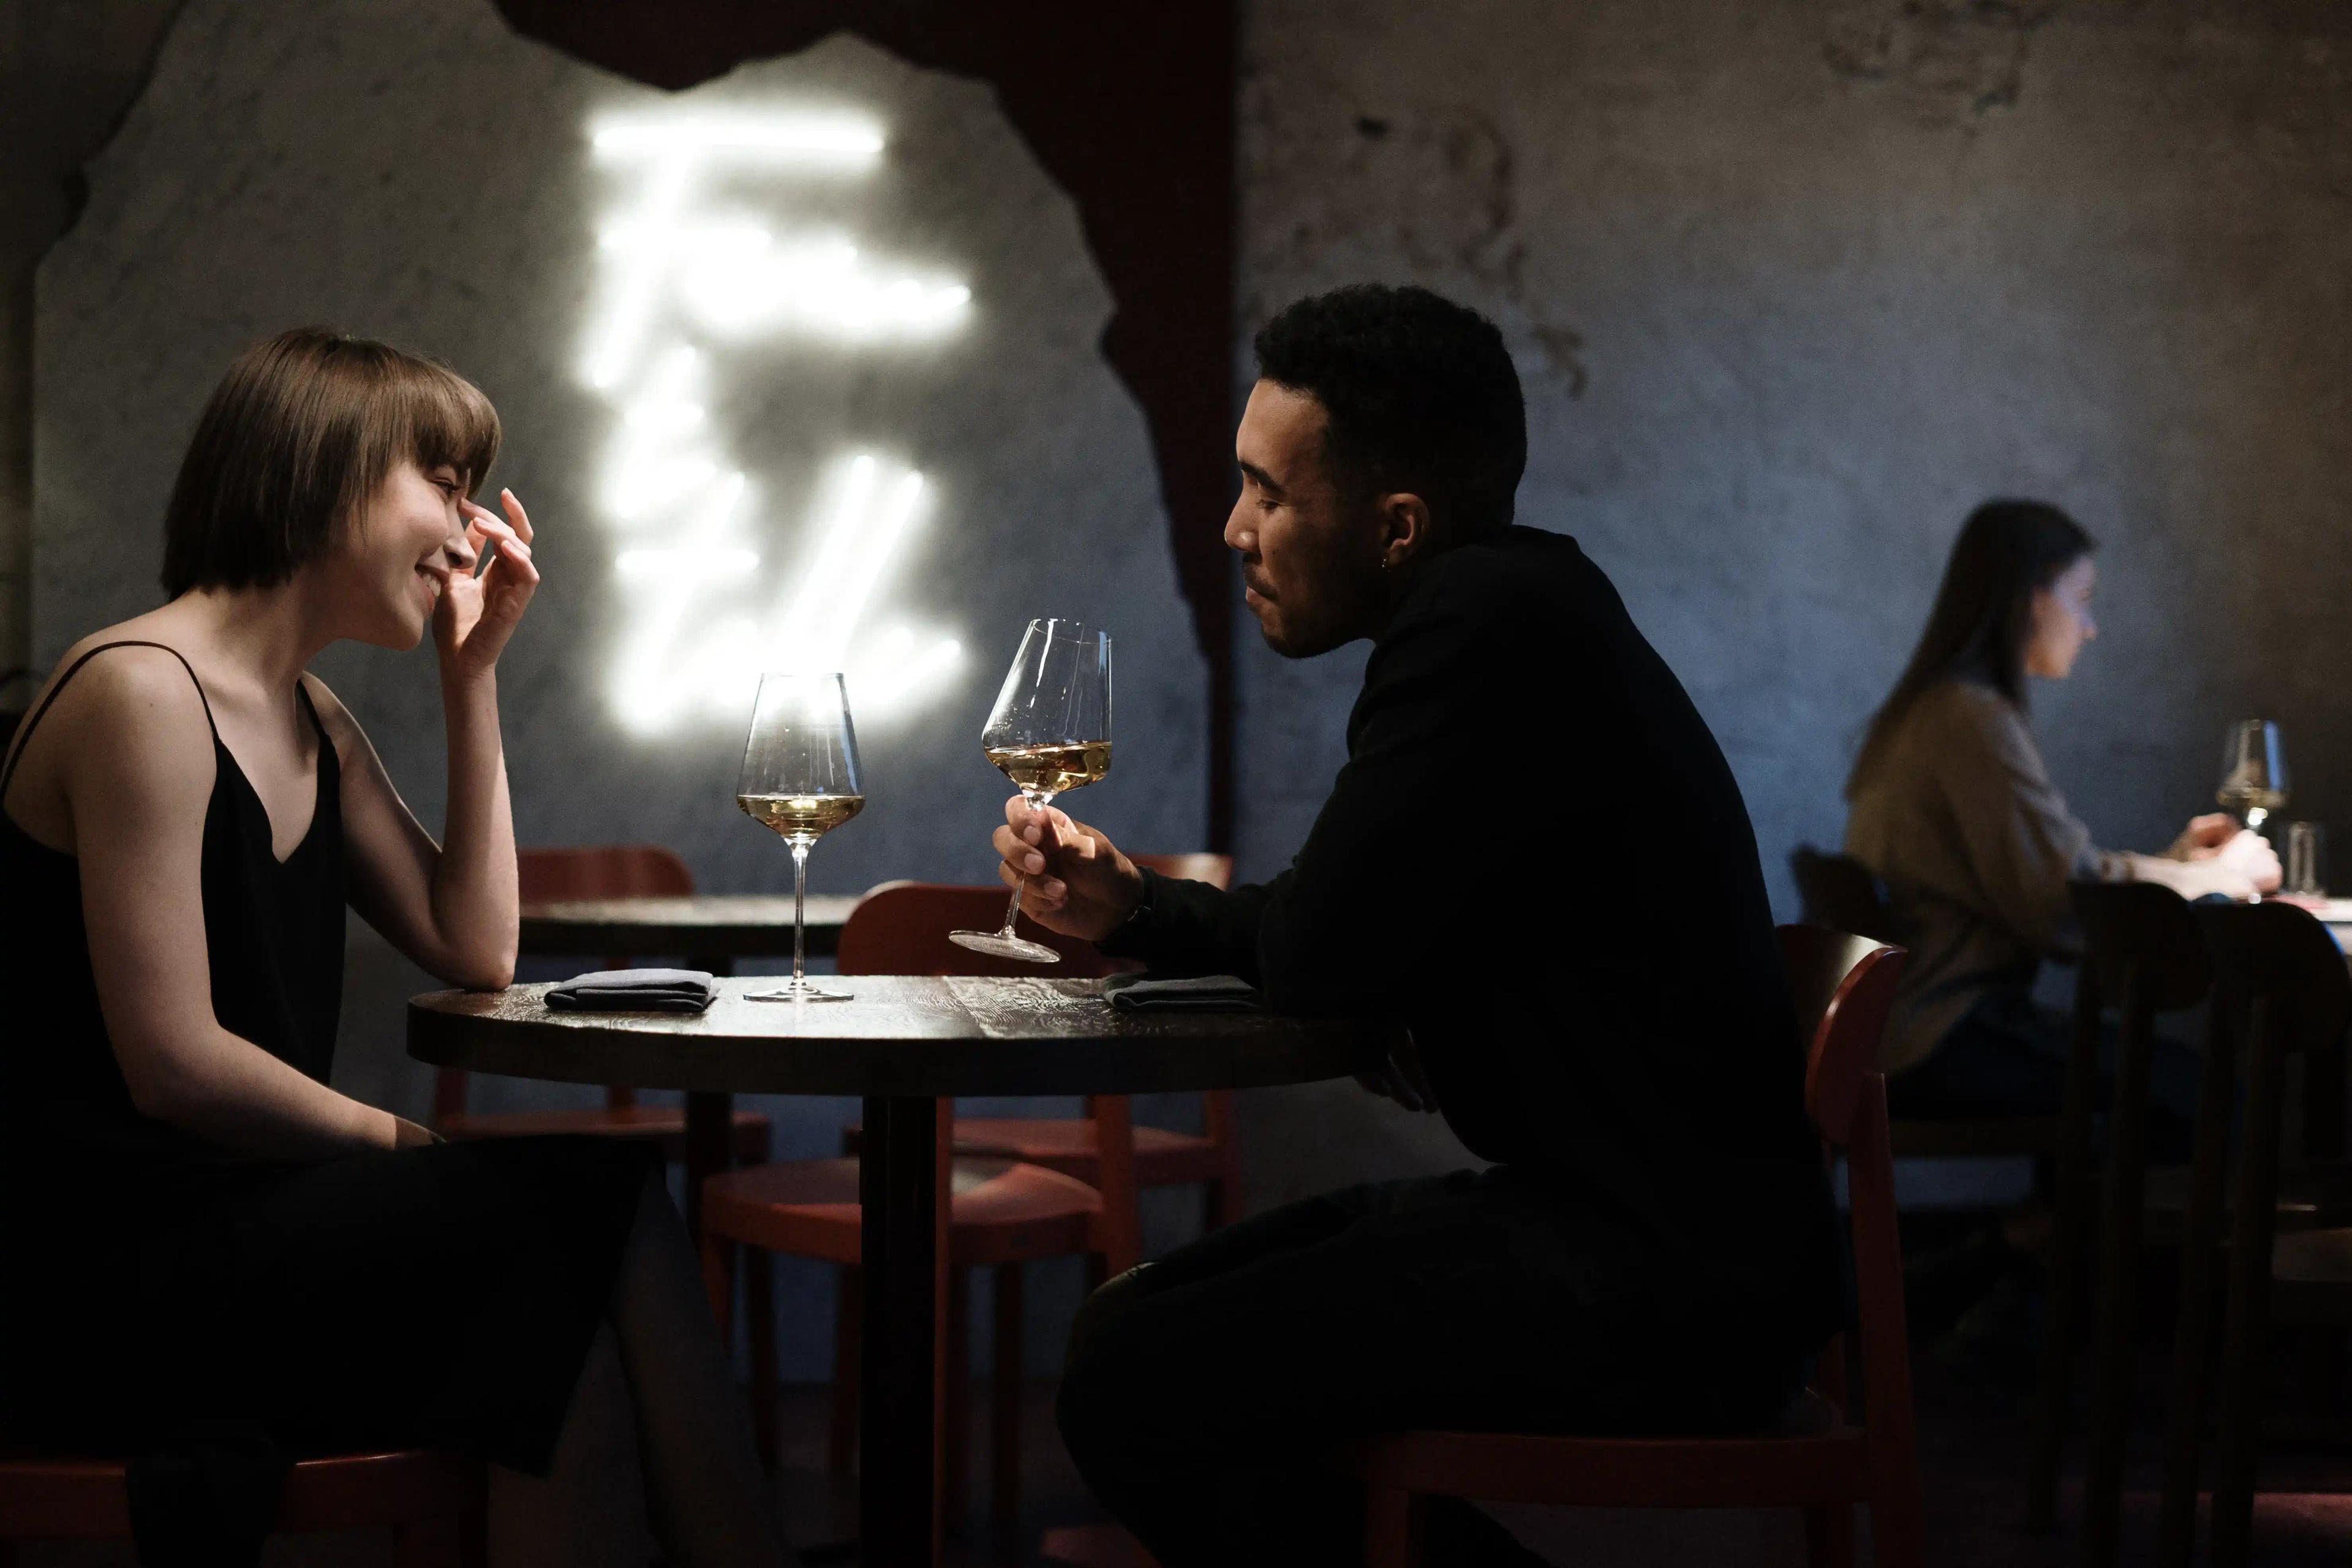 Two People sitting at a table in a restaurant, drinking wine.